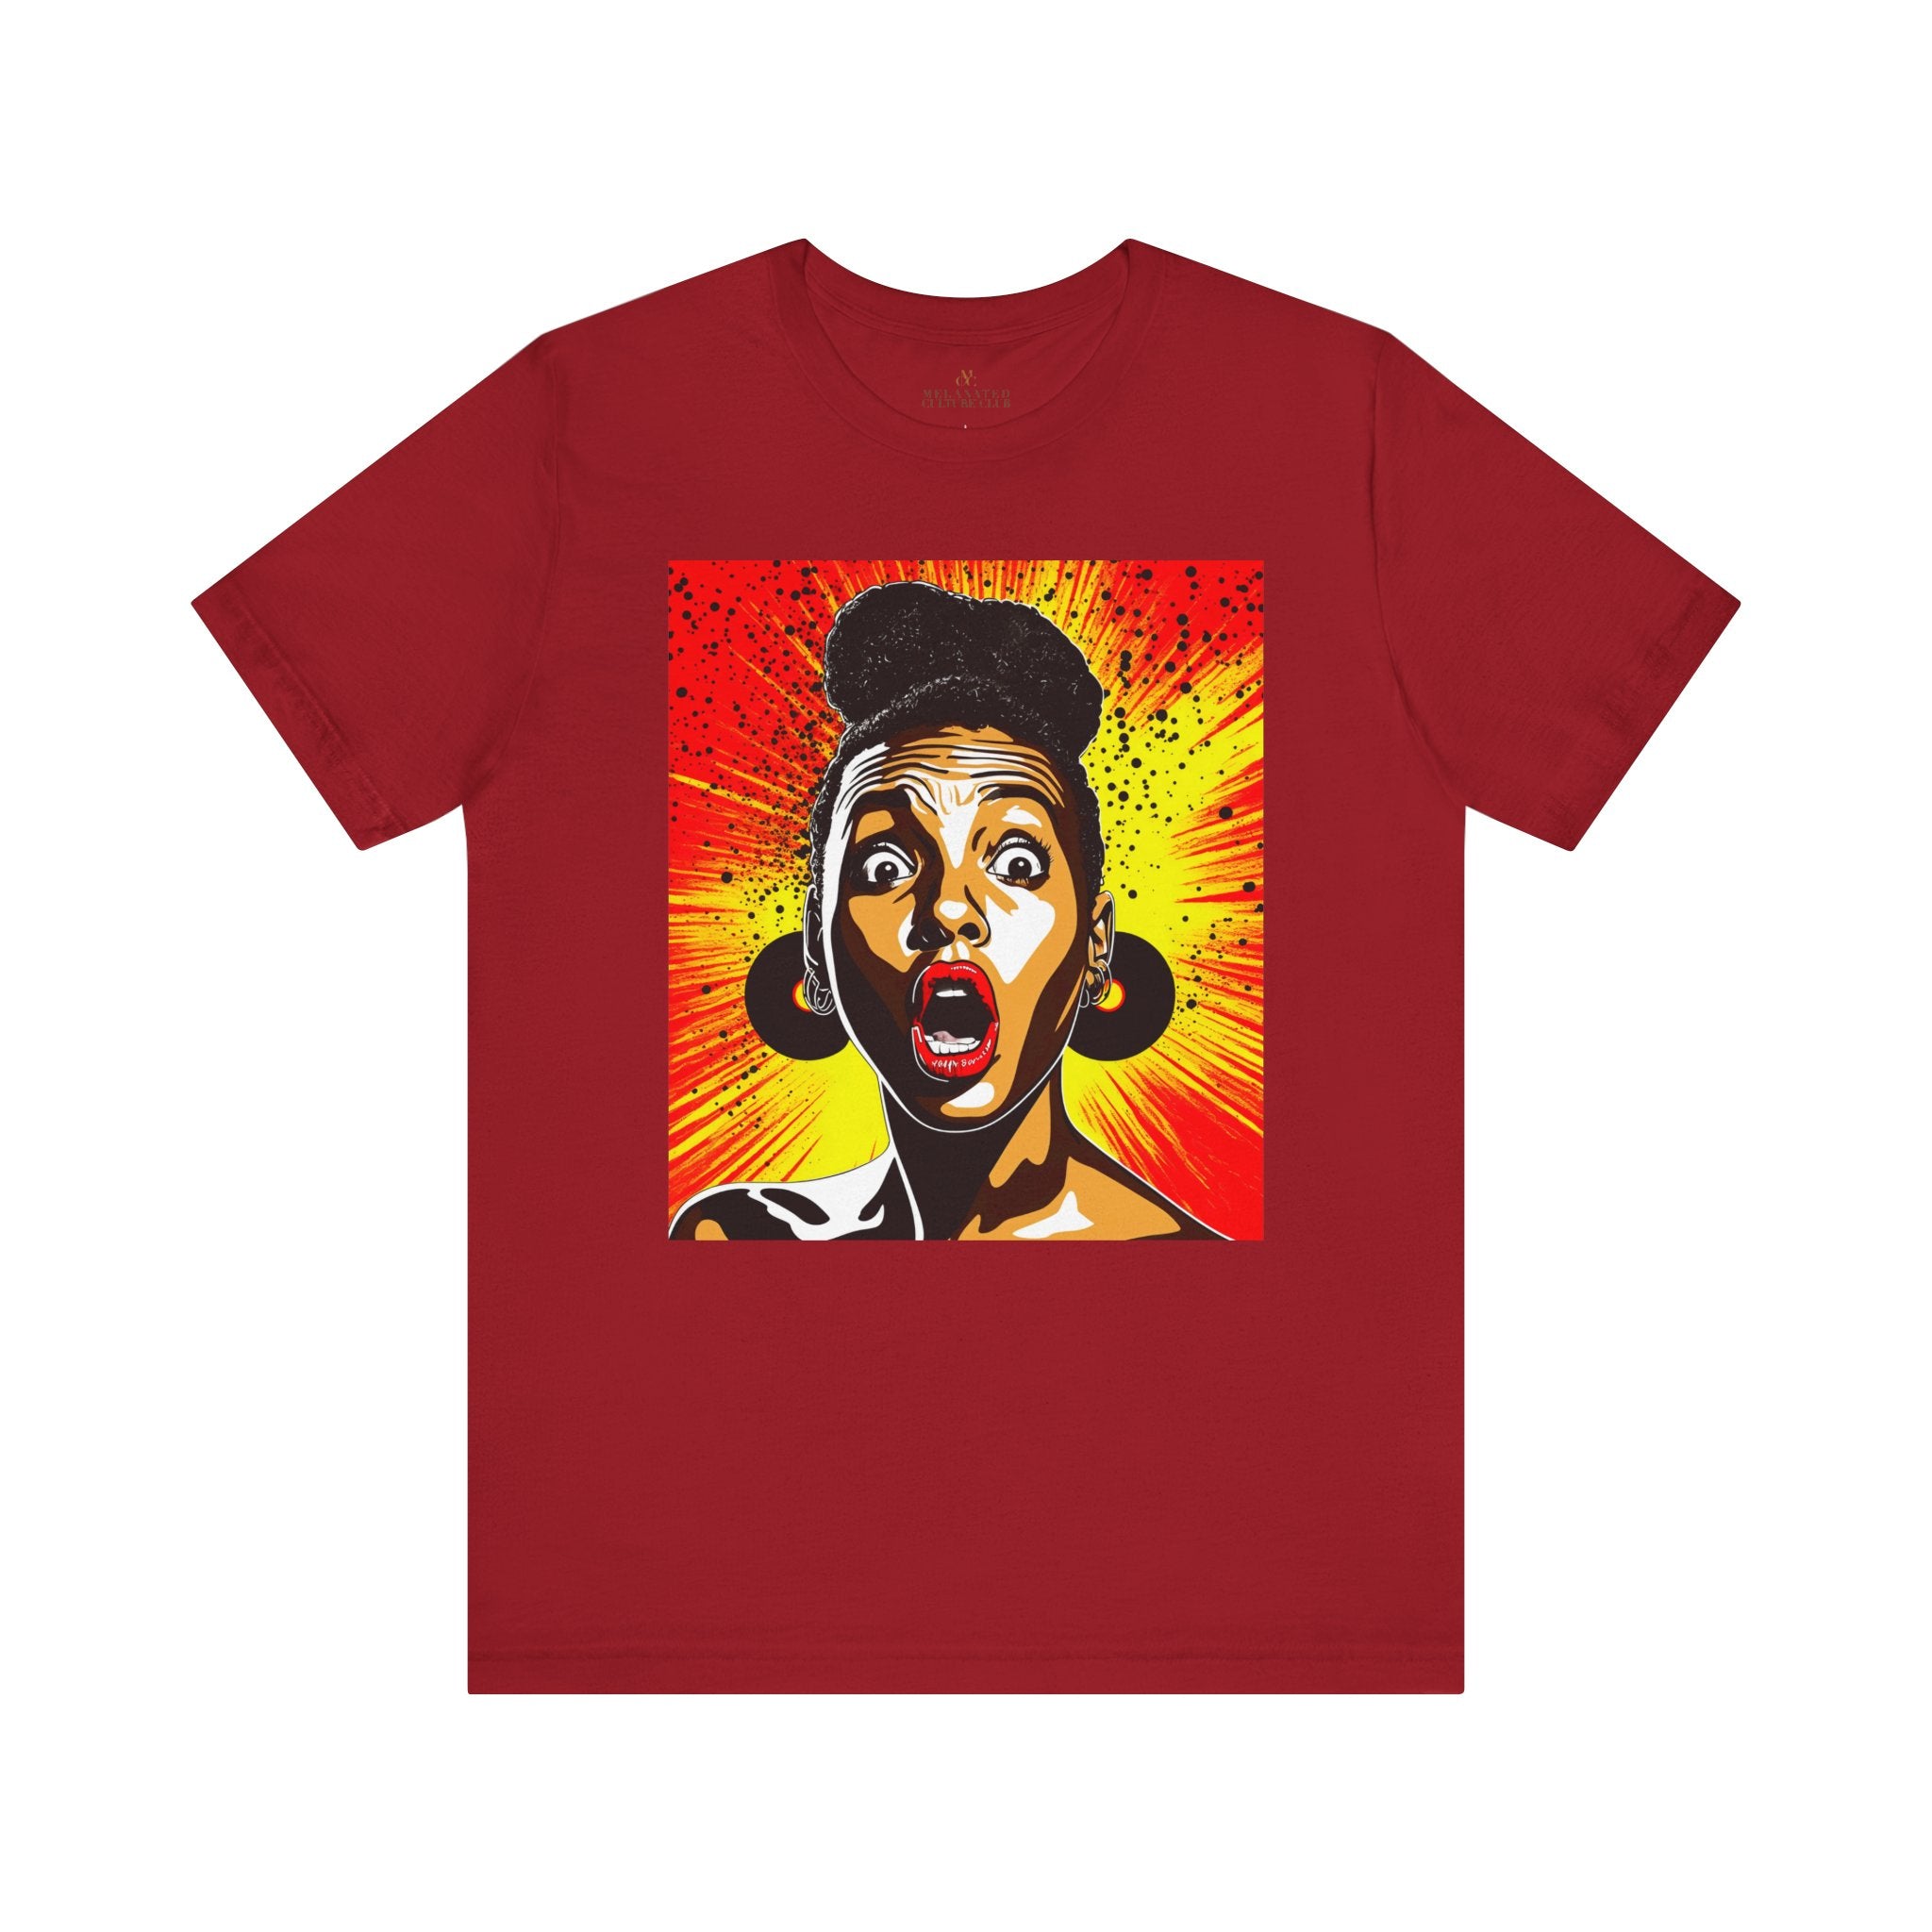 Afrocentric Pop Art Tee Shirt in red.